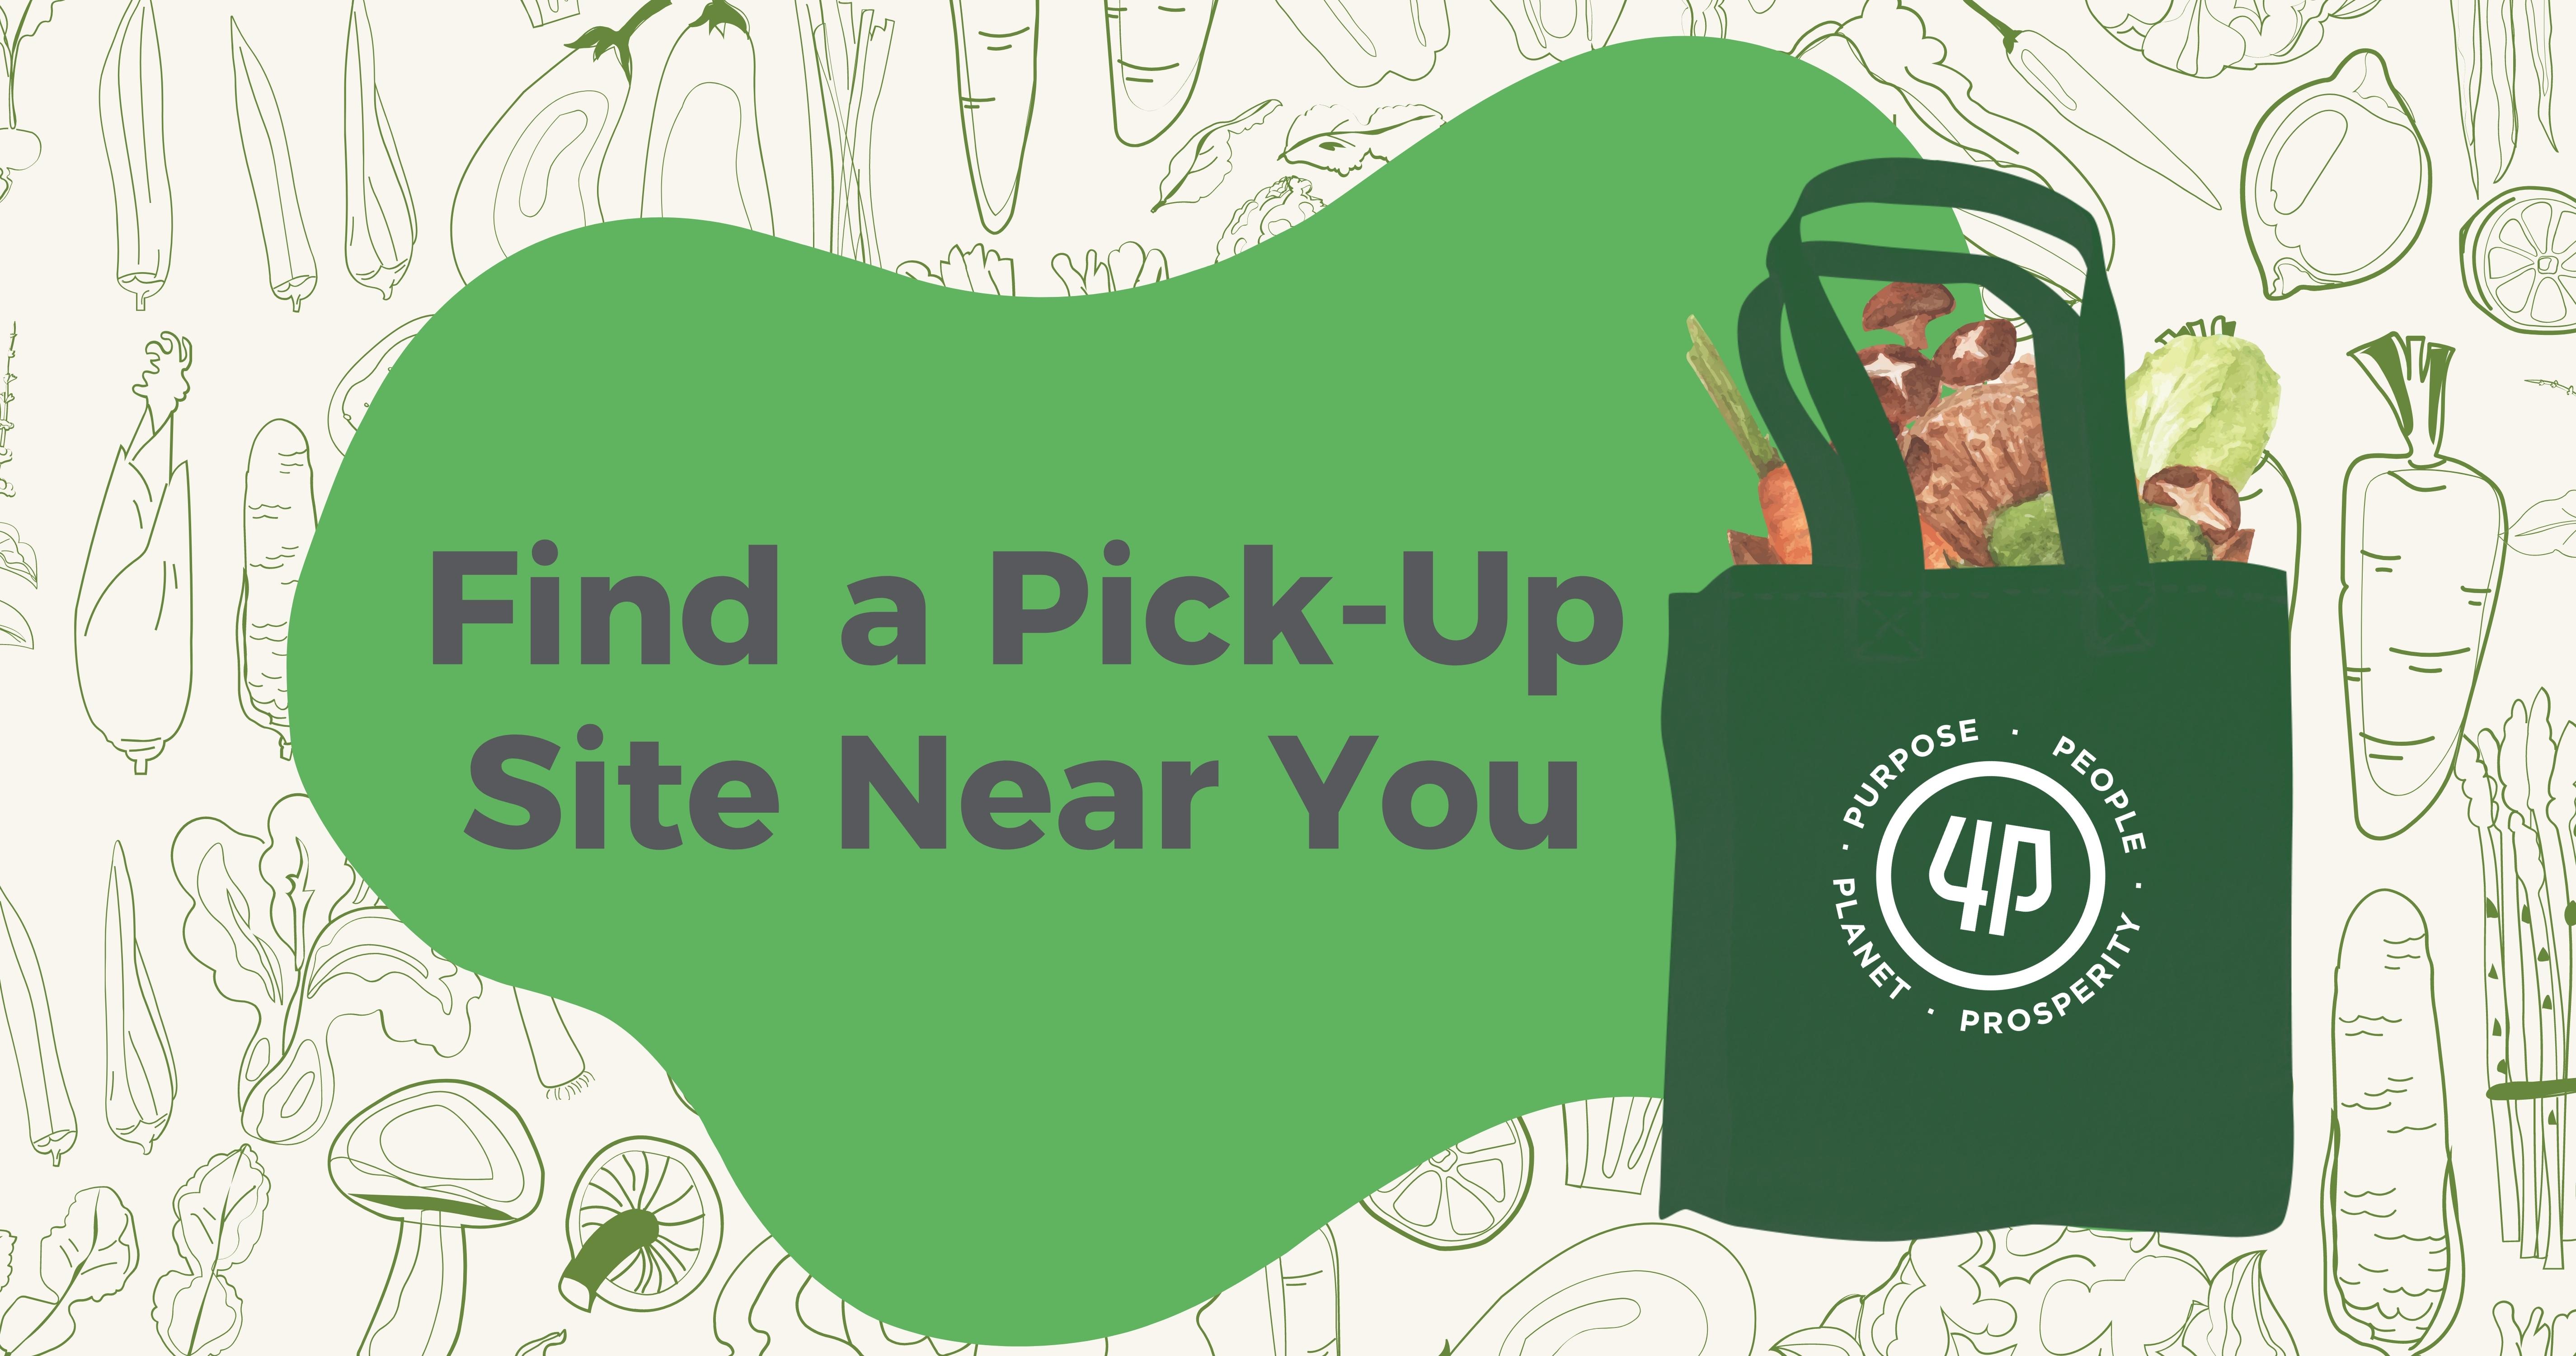 Why Sign Up For A 4P Foods' Pick-Up Site? Free Delivery image